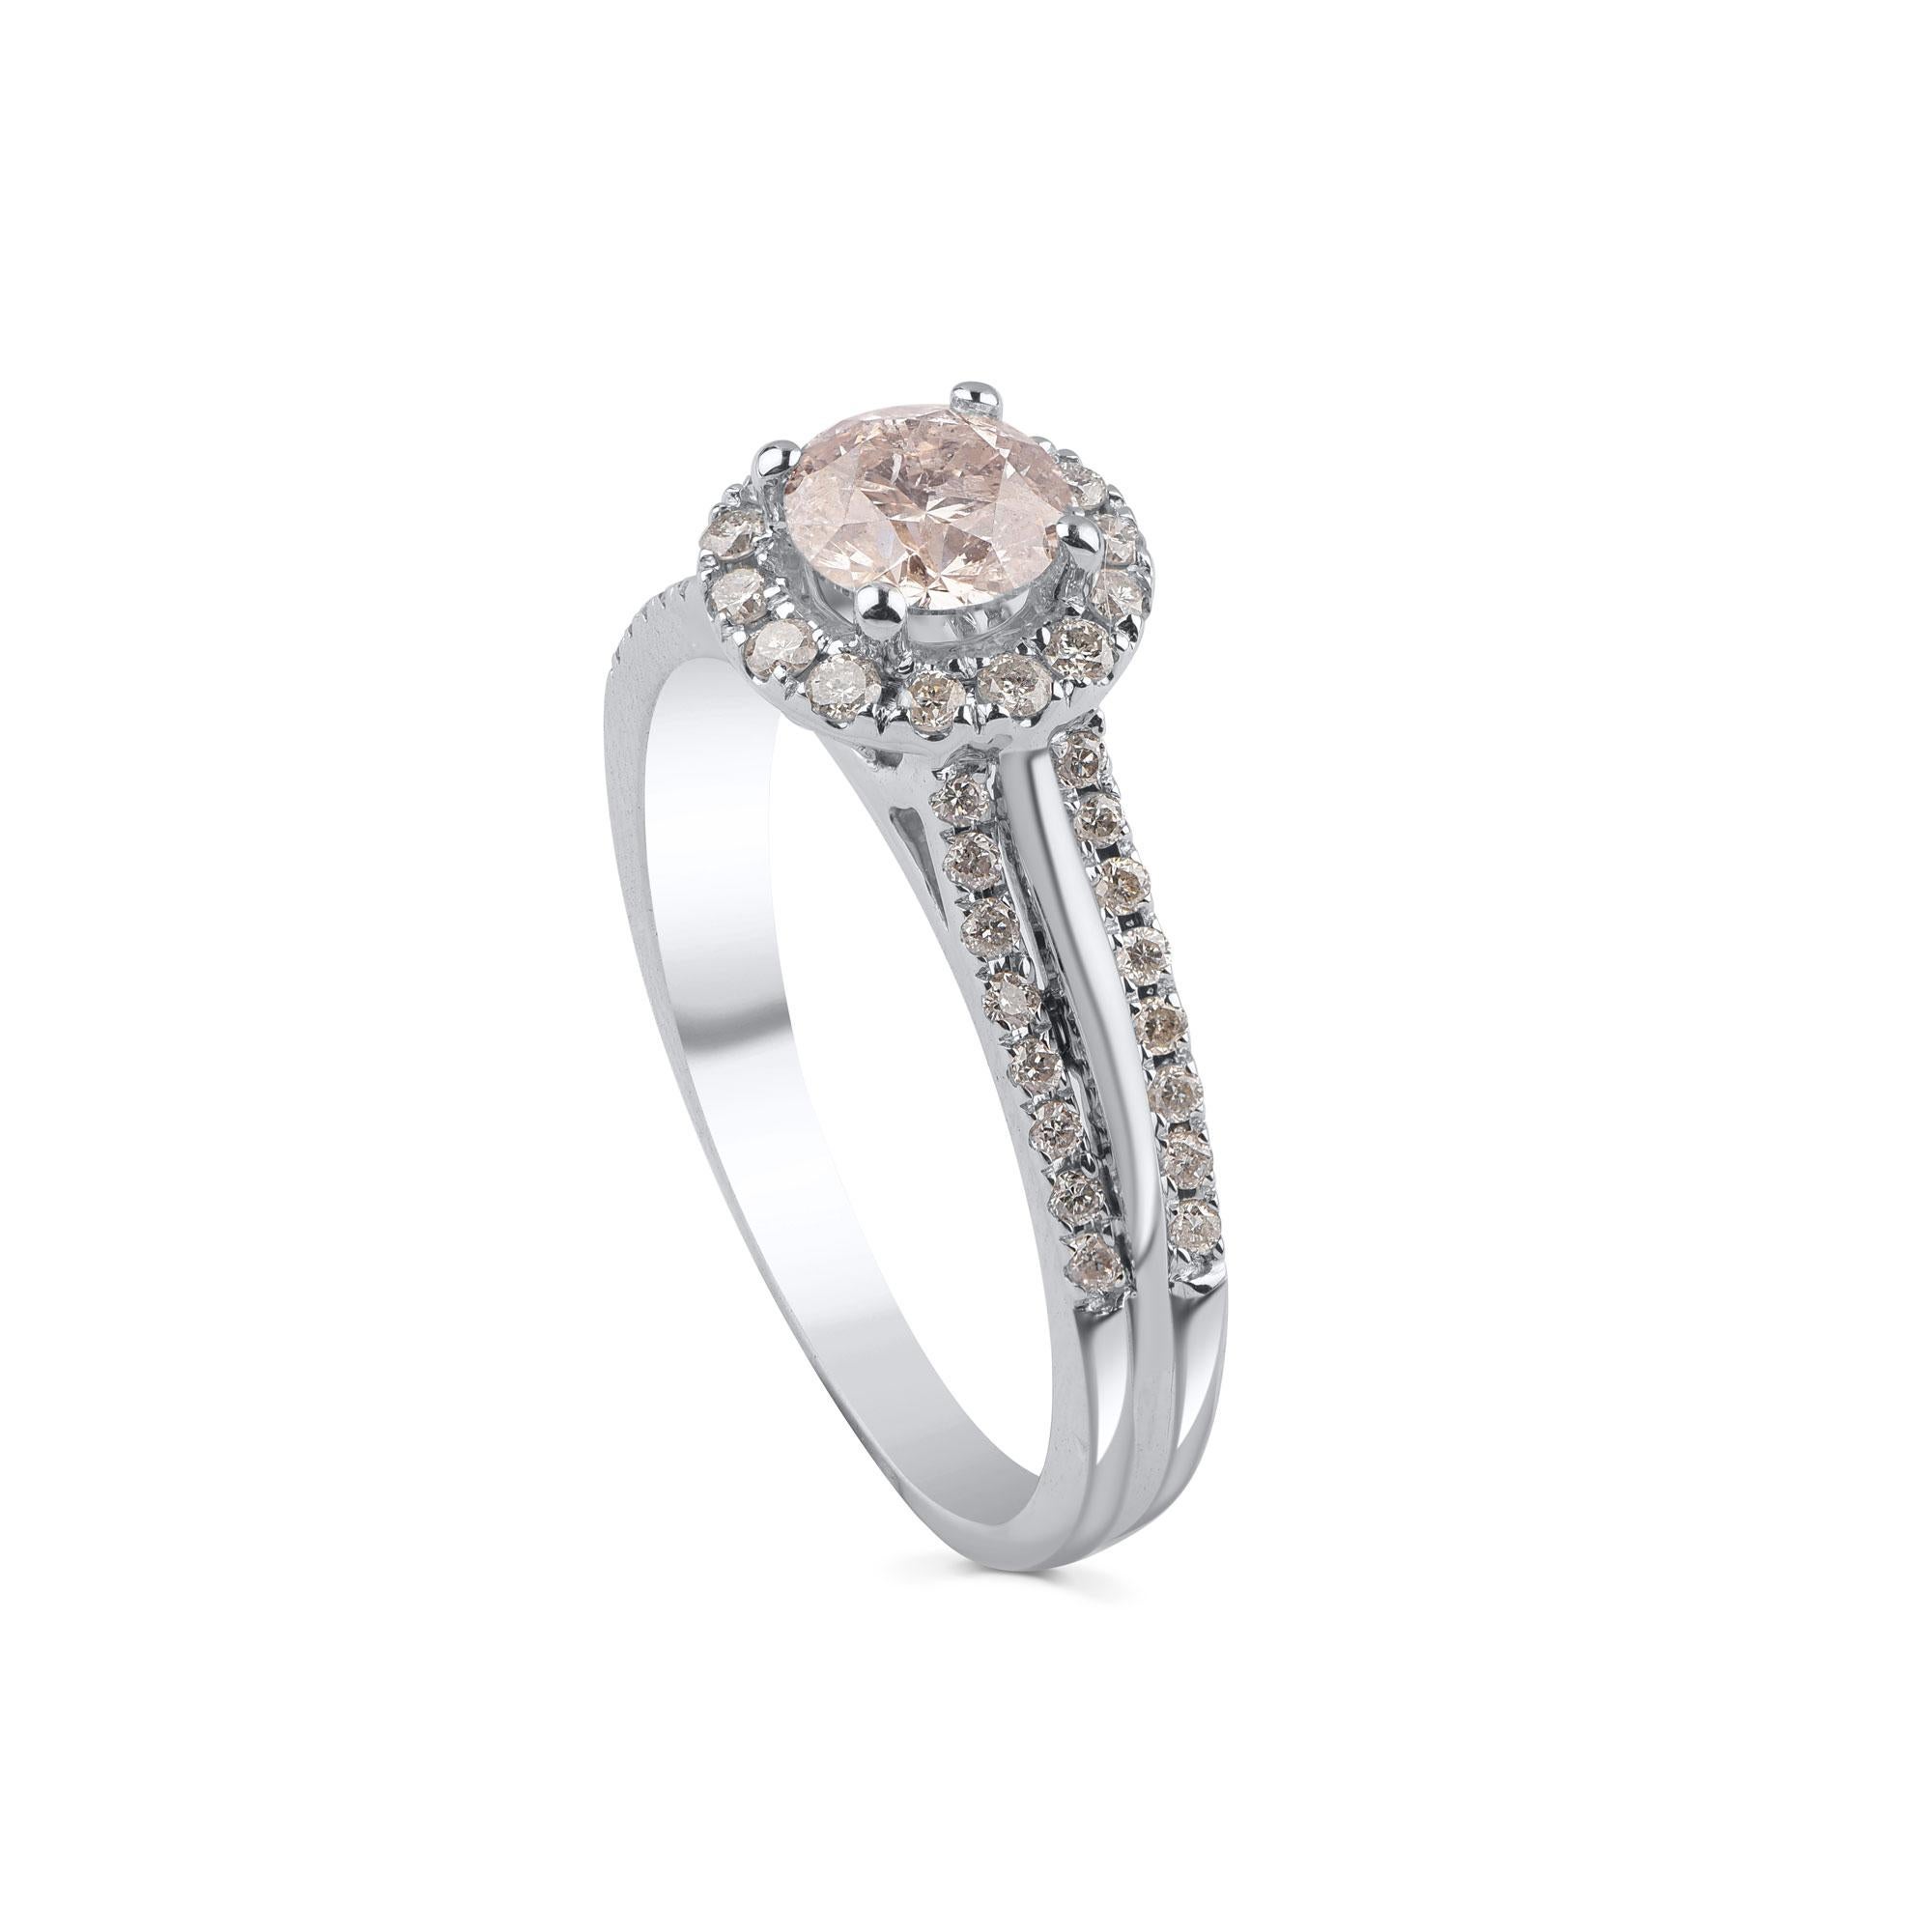 Exquisitely crafted in 18 kt white gold and dazzling with 47 round-cut diamonds embedded beautifully in micro-prong and prong setting, diamonds are graded J-K Color, I3 Clarity. Metal color can be customized in rose and yellow gold. 

Ring size is